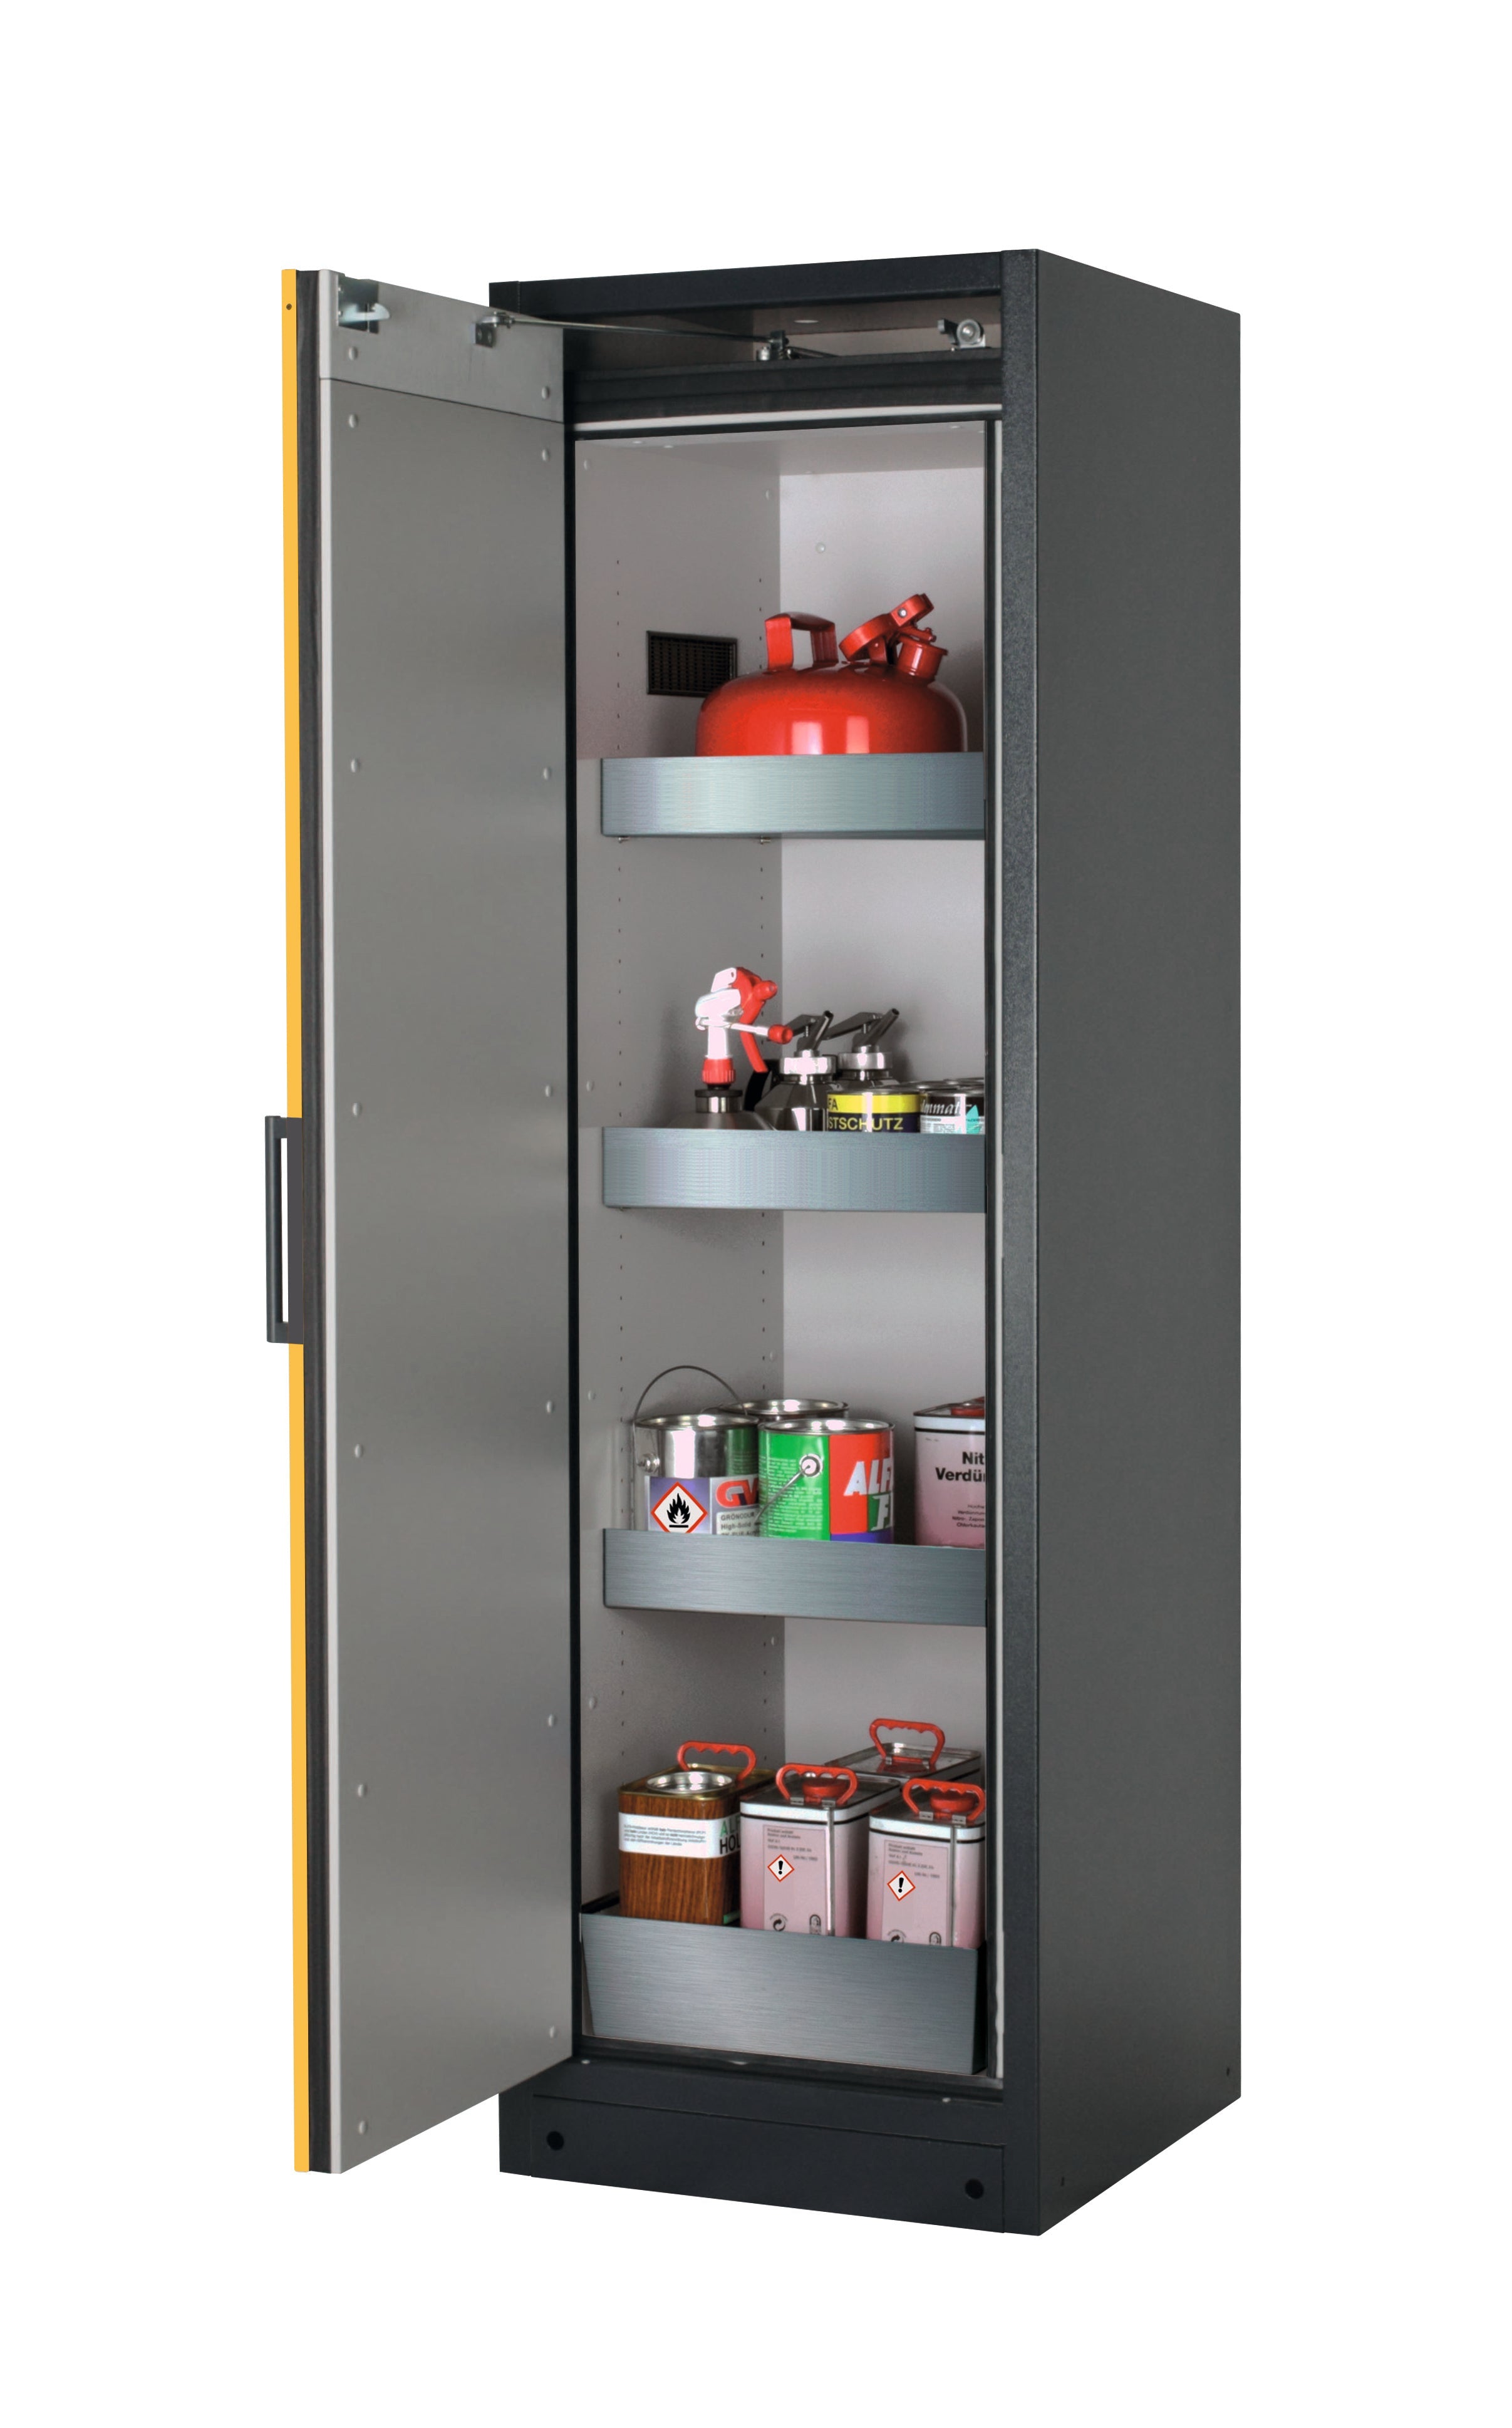 Type 90 safety storage cabinet Q-PEGASUS-90 model Q90.195.060.WDAC in warning yellow RAL 1004 with 3x tray shelf (standard) (stainless steel 1.4301),